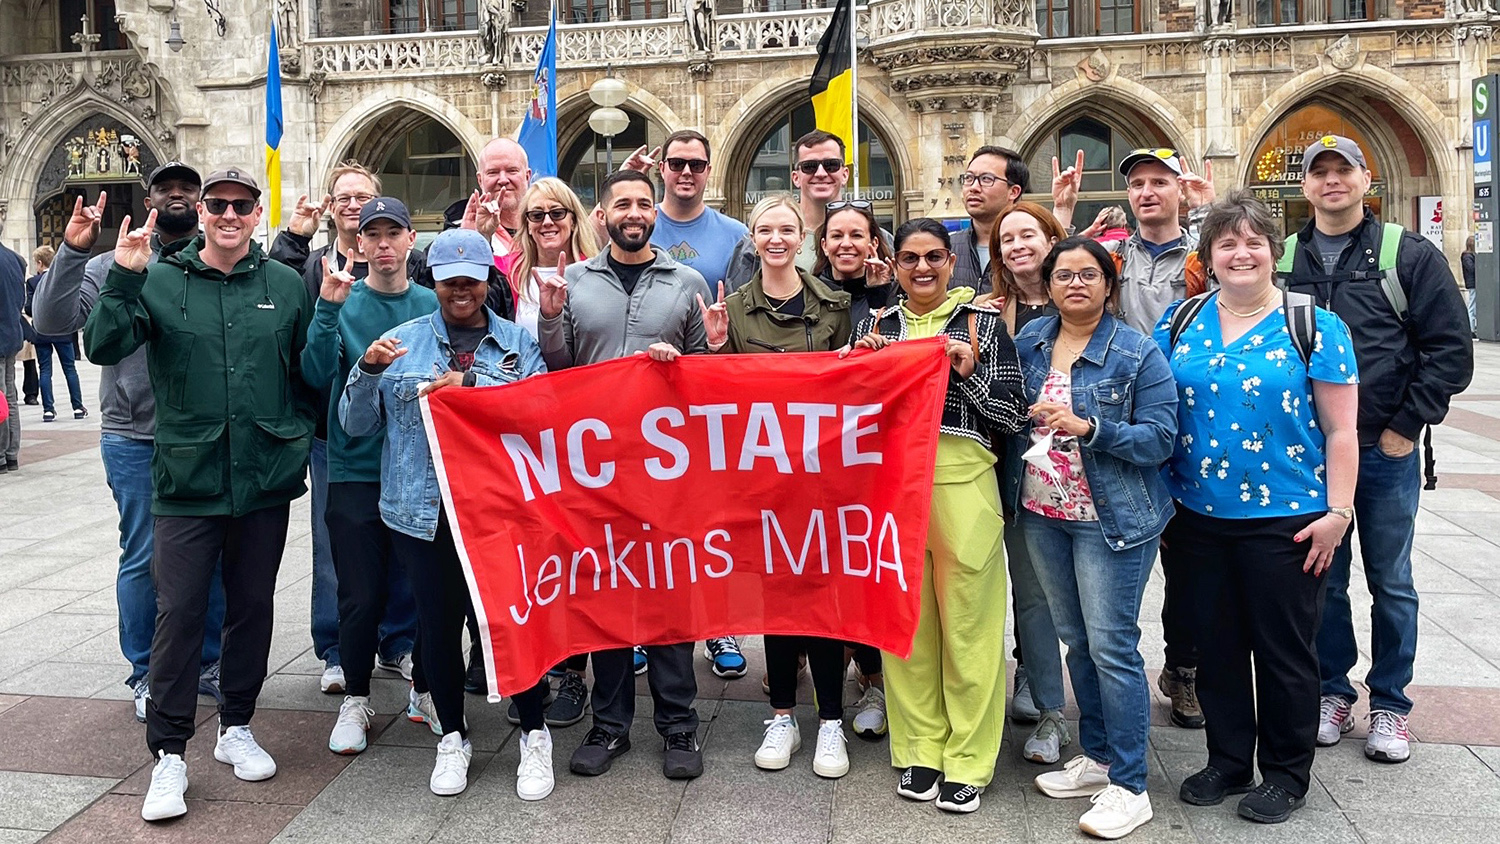 MBA students smiling in a group photo while studying abroad.